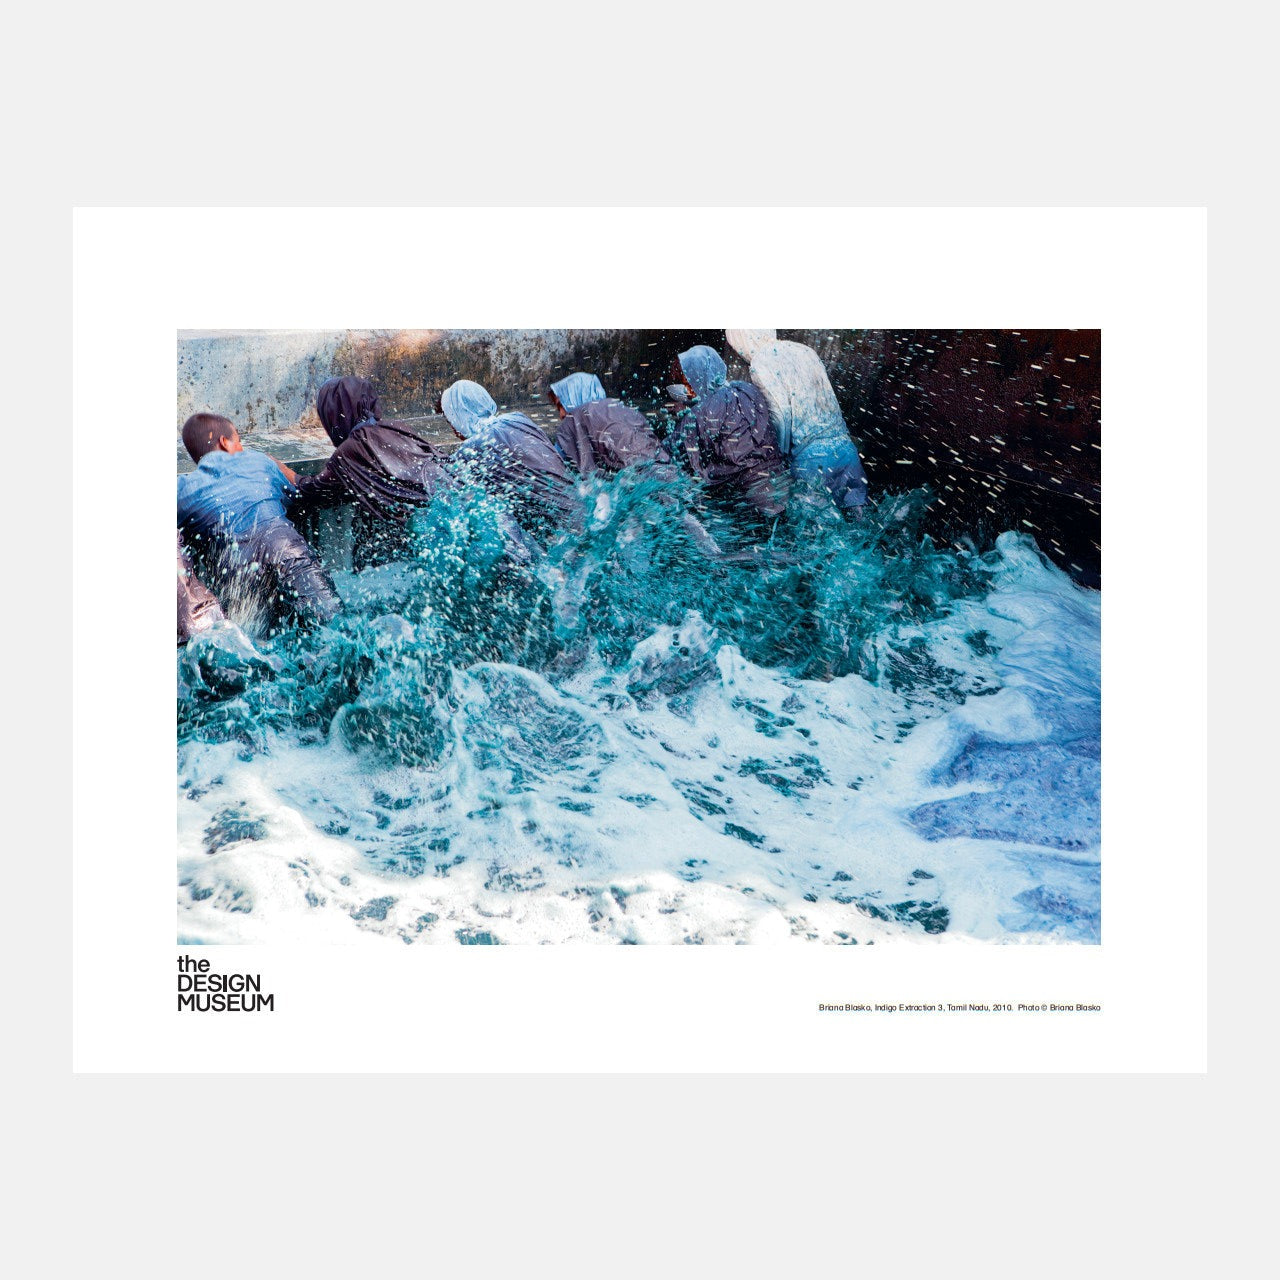 Poster of a wave and group of people